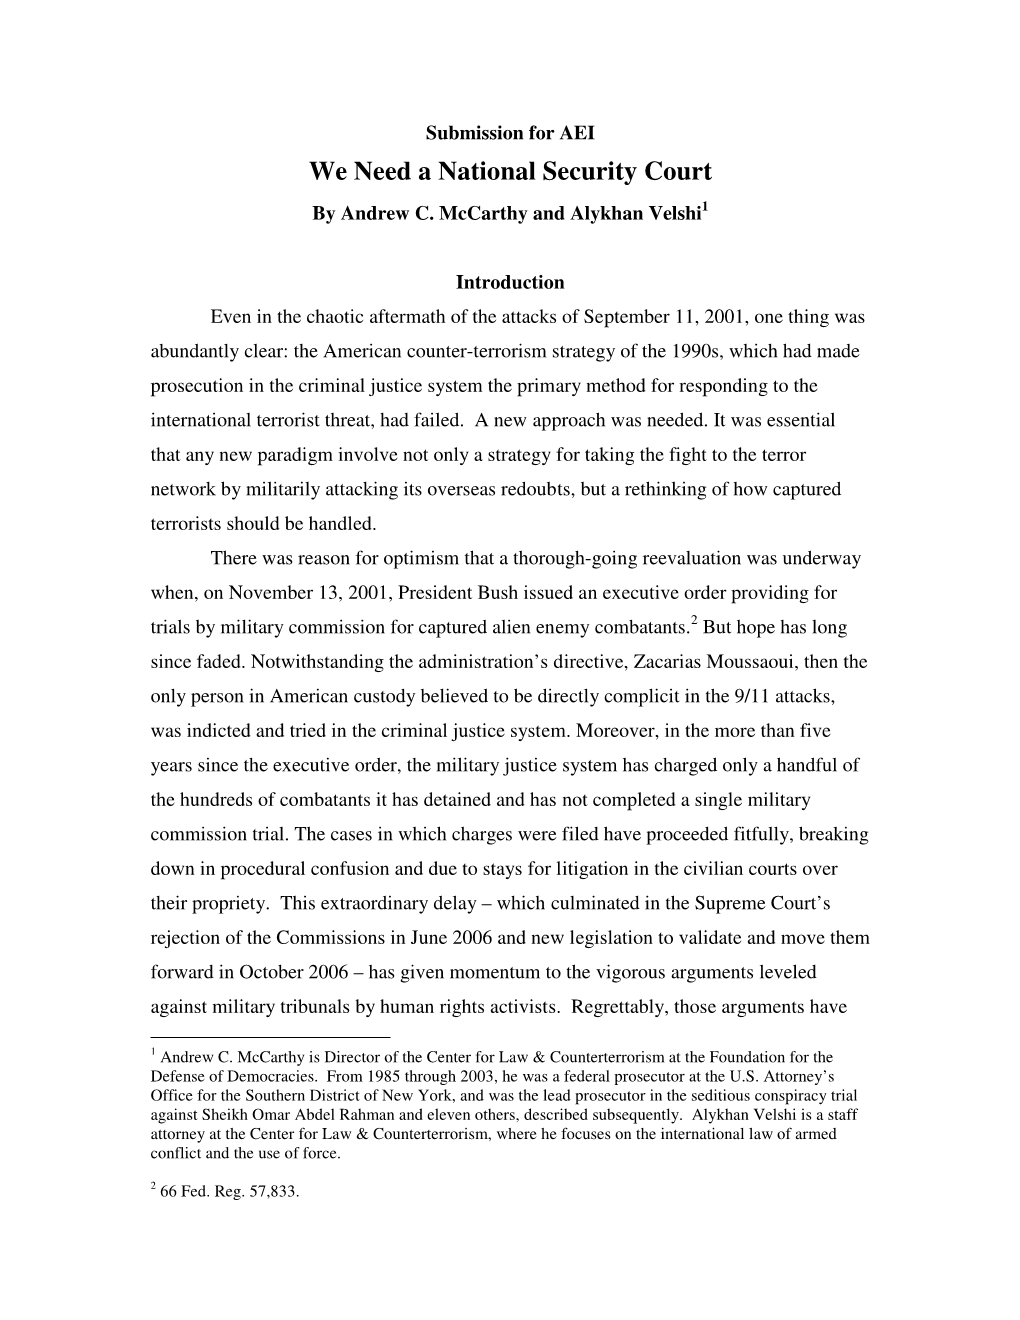 We Need a National Security Court by Andrew C